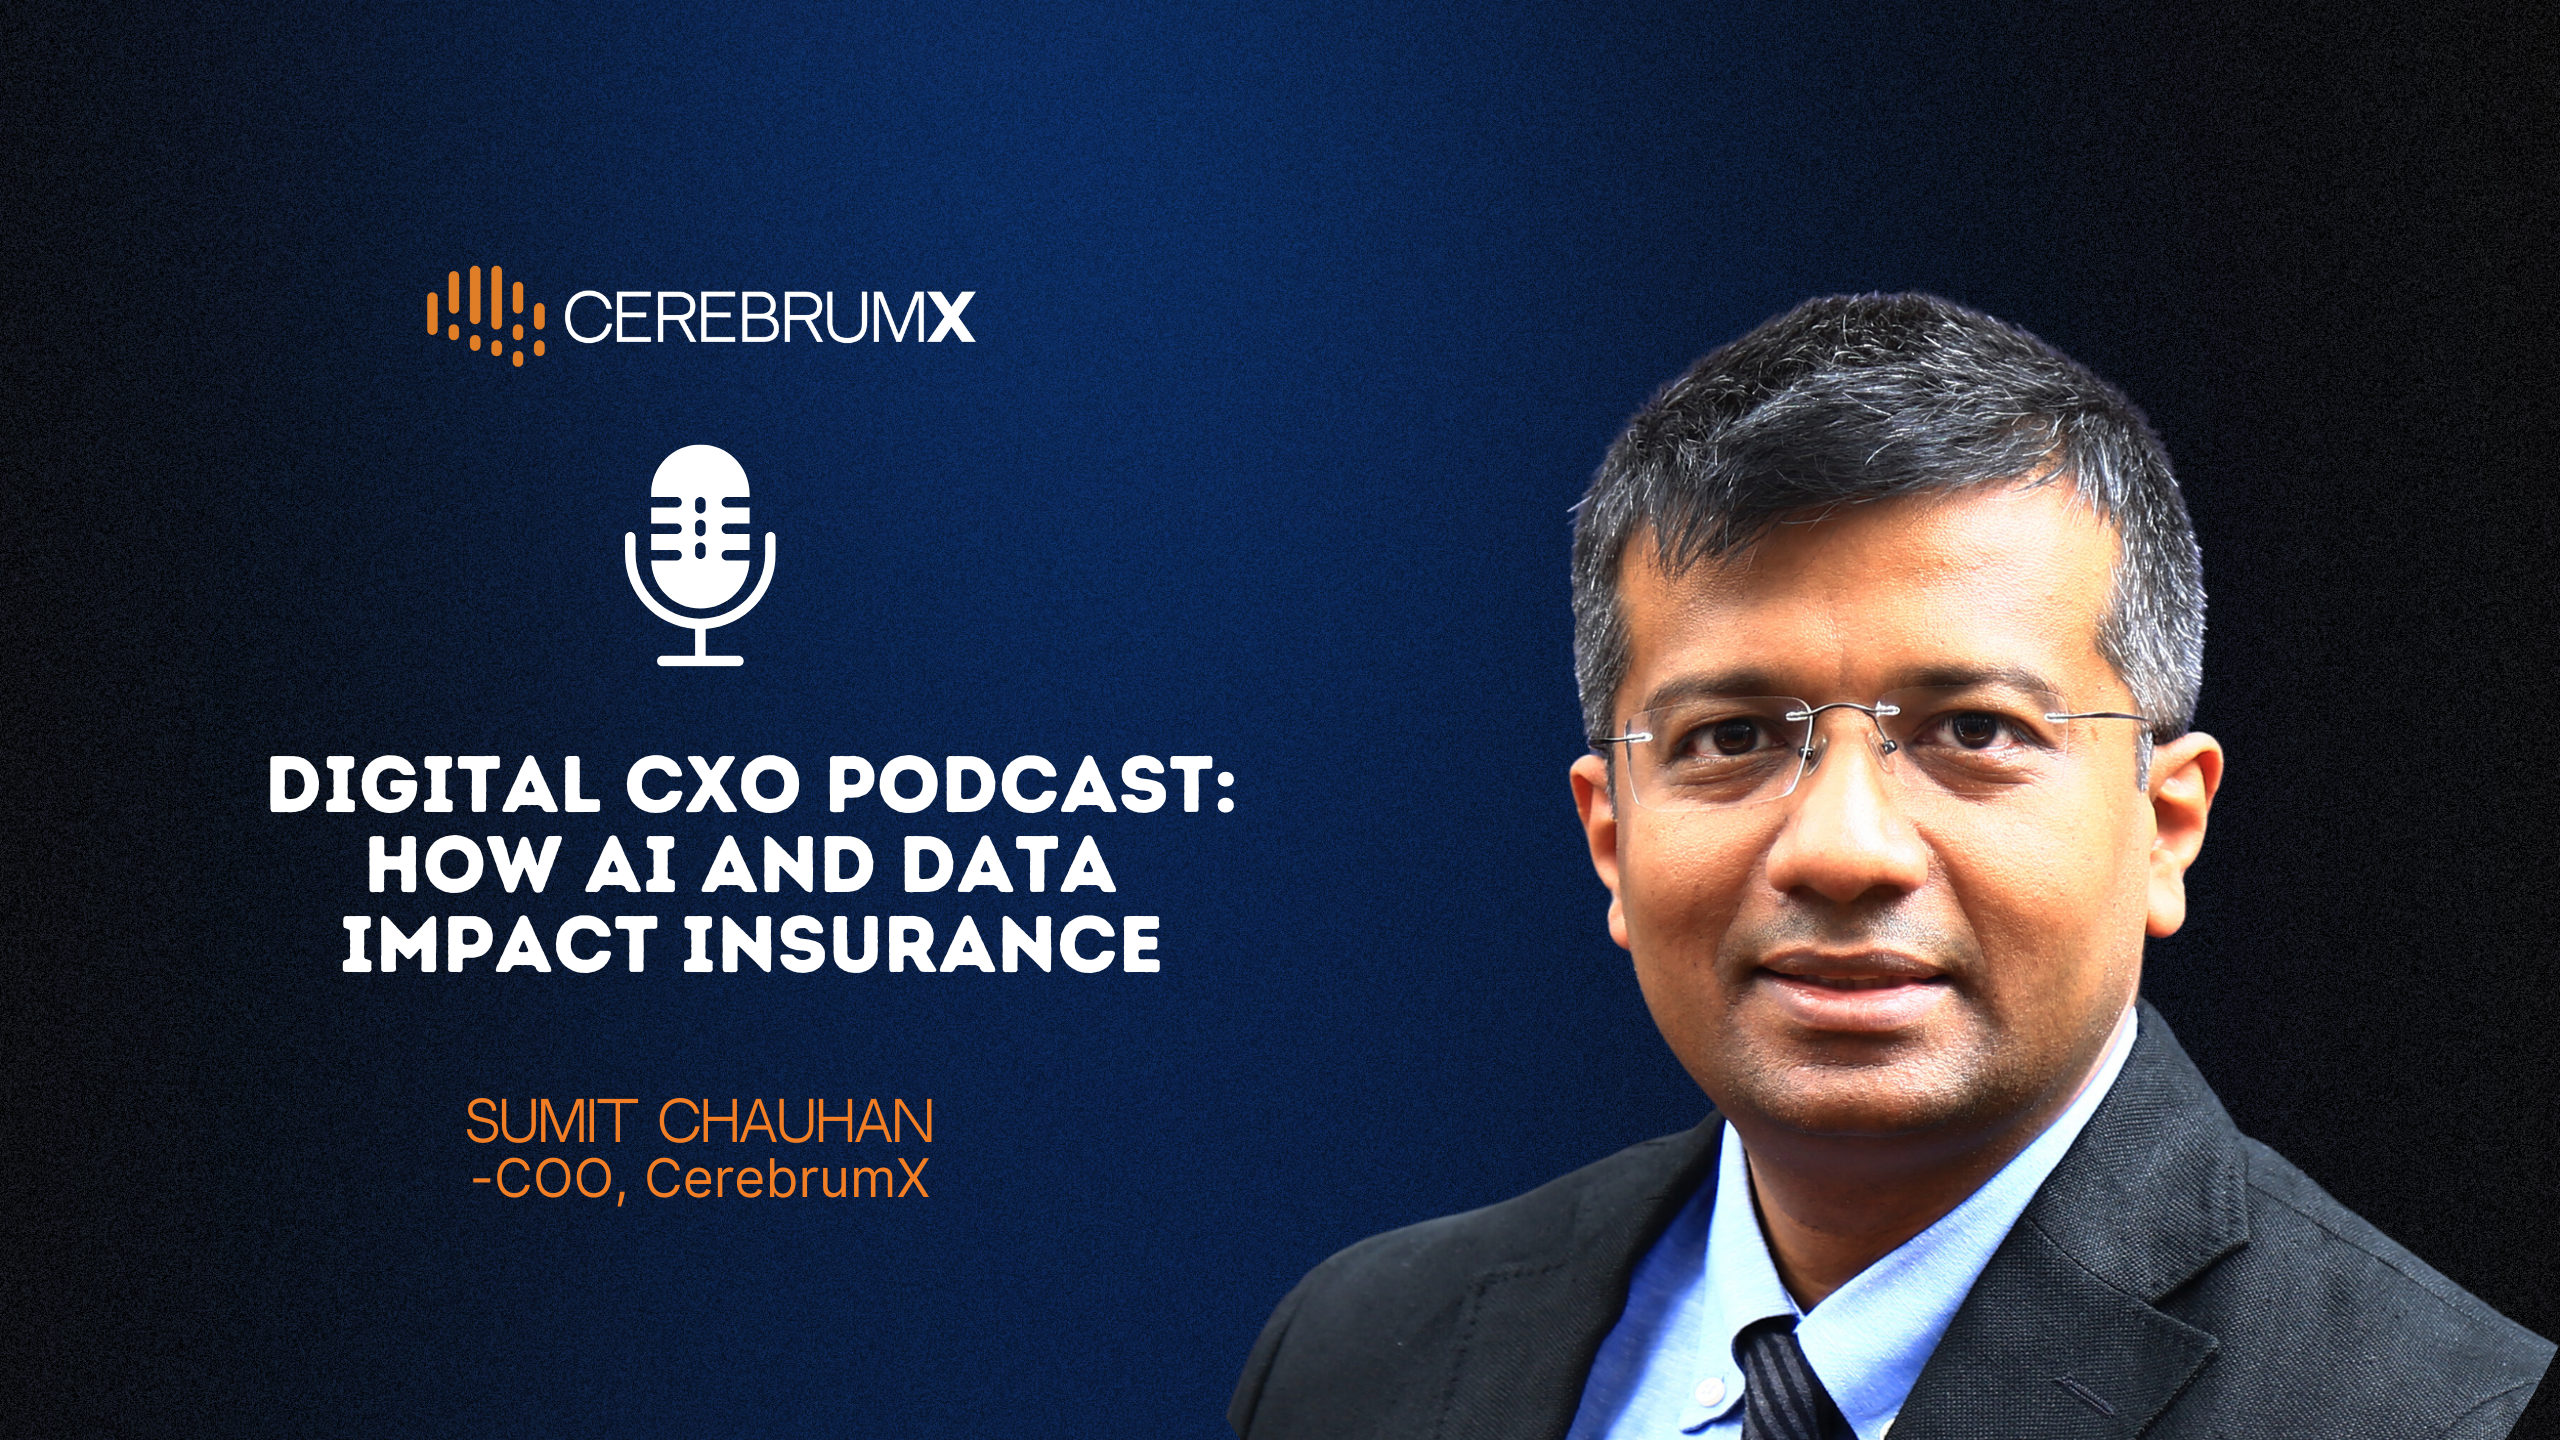 New Podcast: Sumit Chauhan Chats With Digital CxO on Utilising AI for Usage-Based Insurance